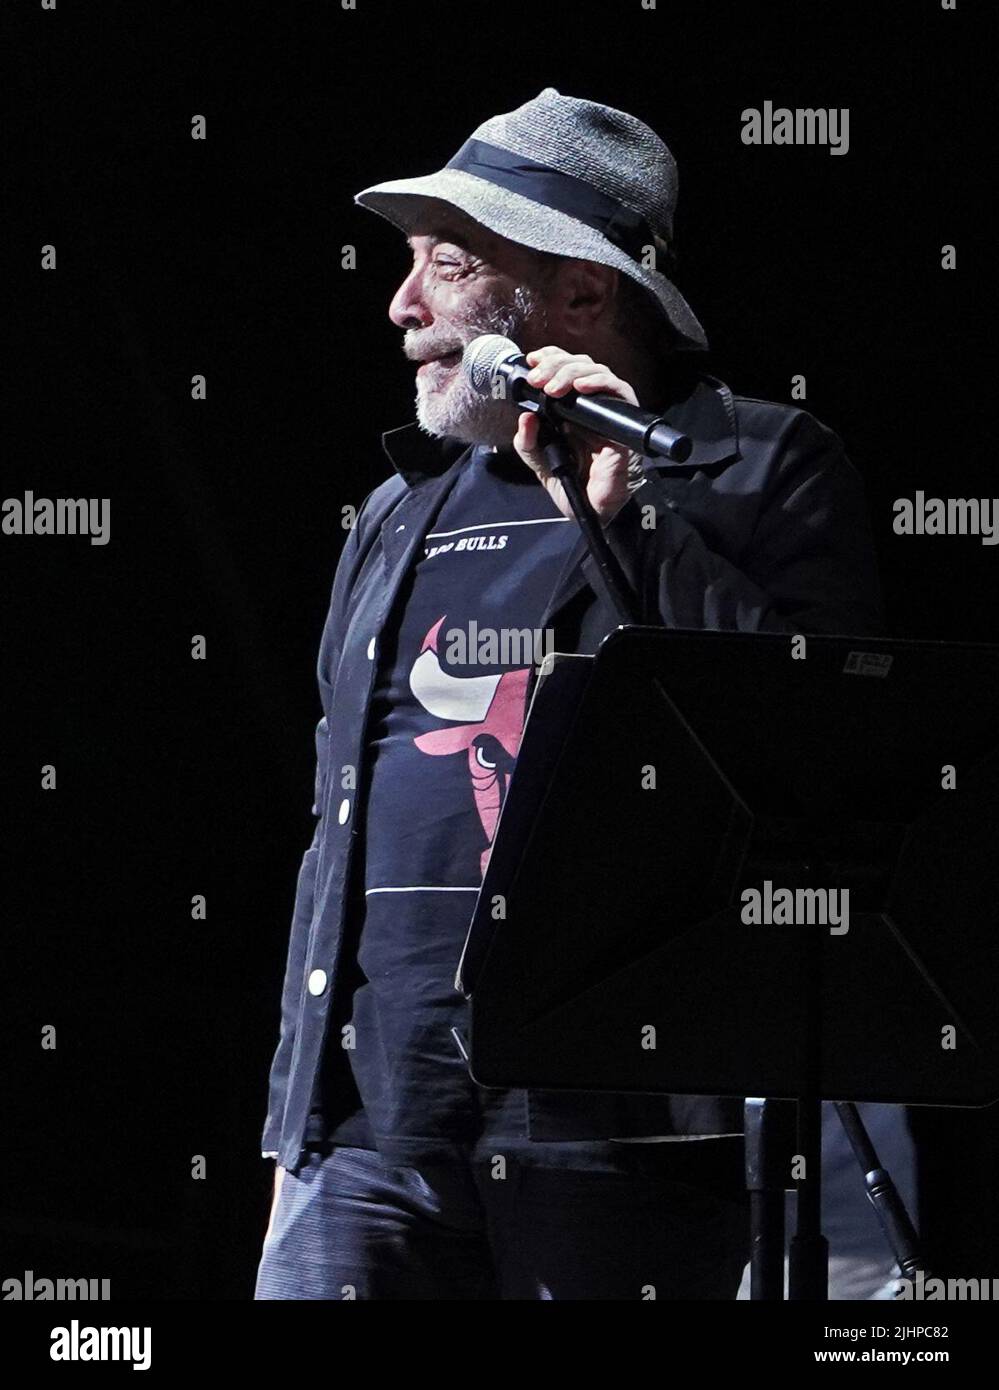 Vercelli, Italy. 19th July, 2022. A moment of the live show of the Italian comedian, stand-up comedian, actor and conductor Nino Frassica, accompanied by the music band 'Los Plaggers' Stock Photo